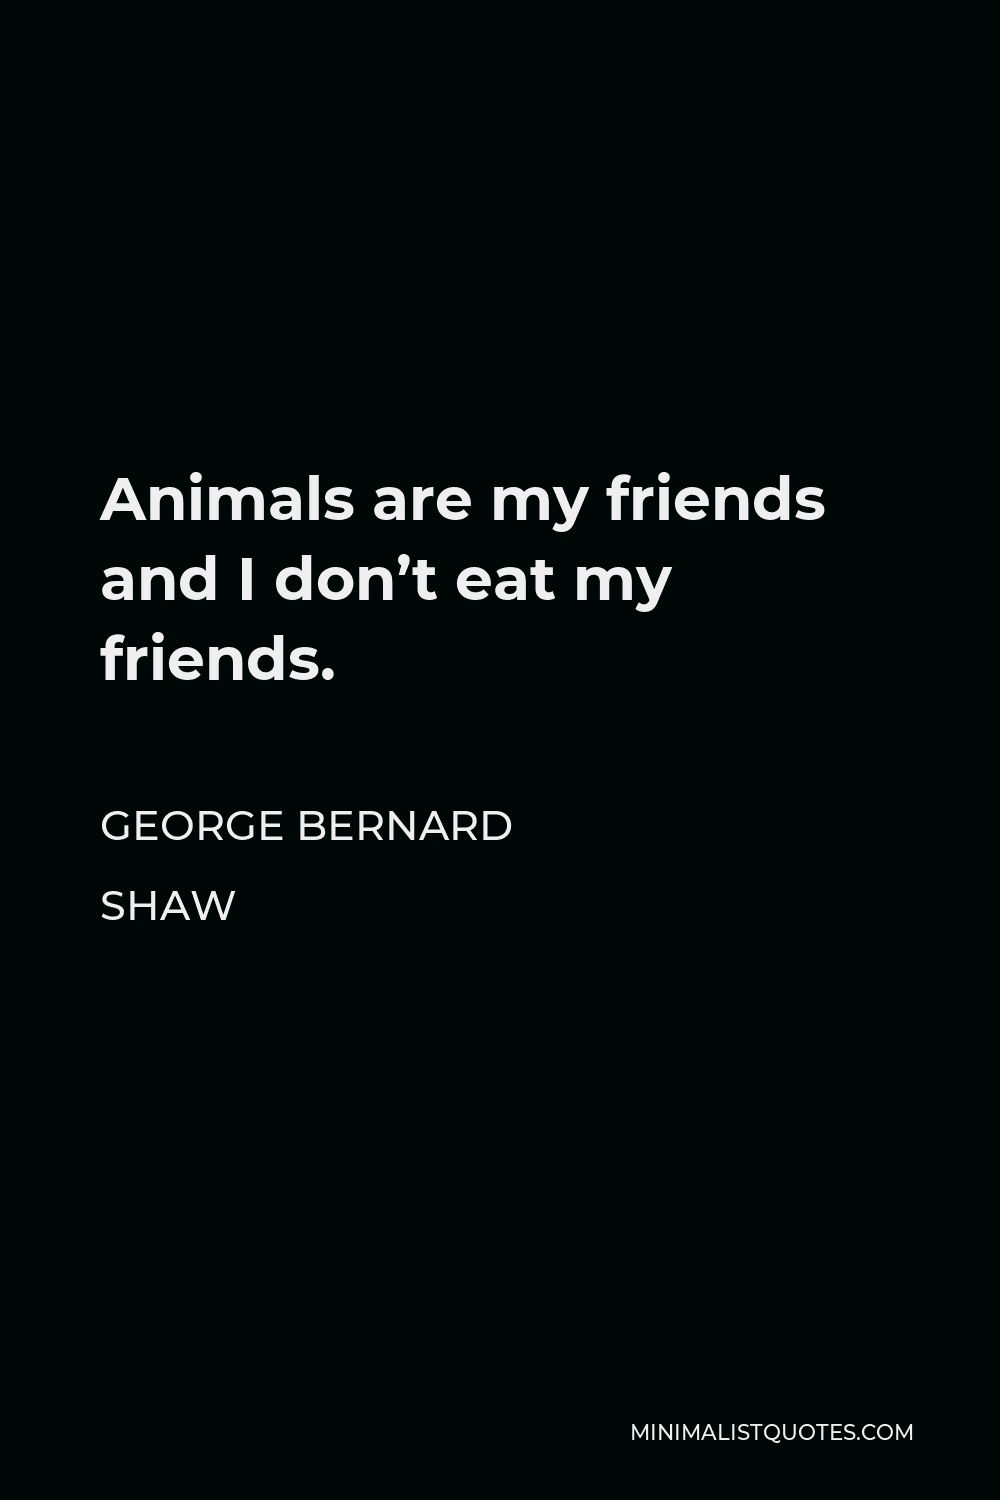 George Bernard Shaw Quote - Animals are my friends and I don’t eat my friends.